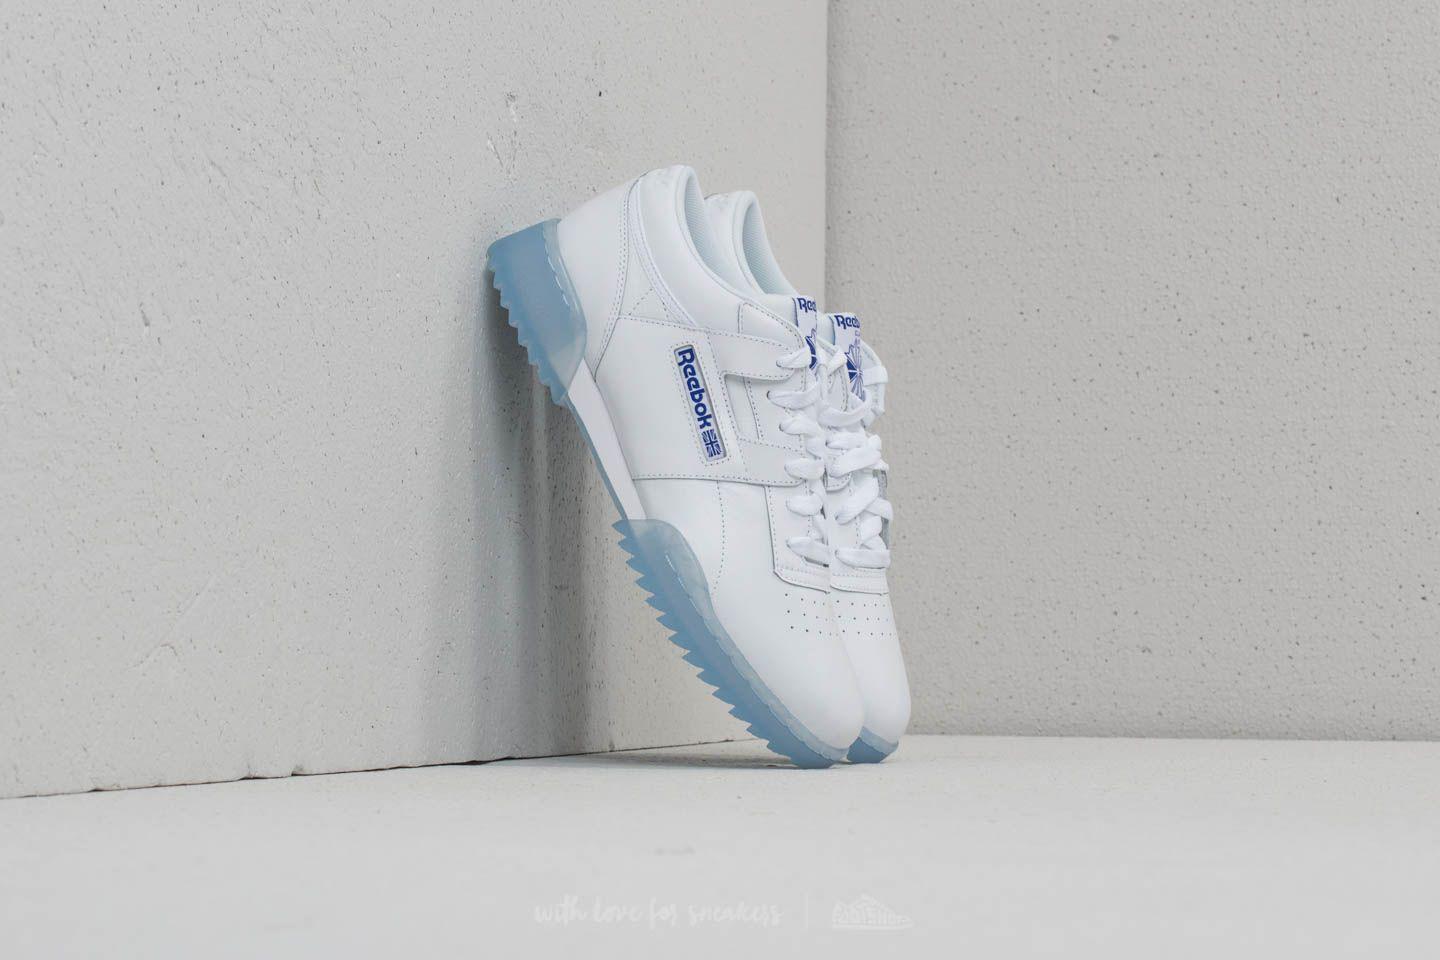  Reebok Workout Ice Blue for Build Muscle